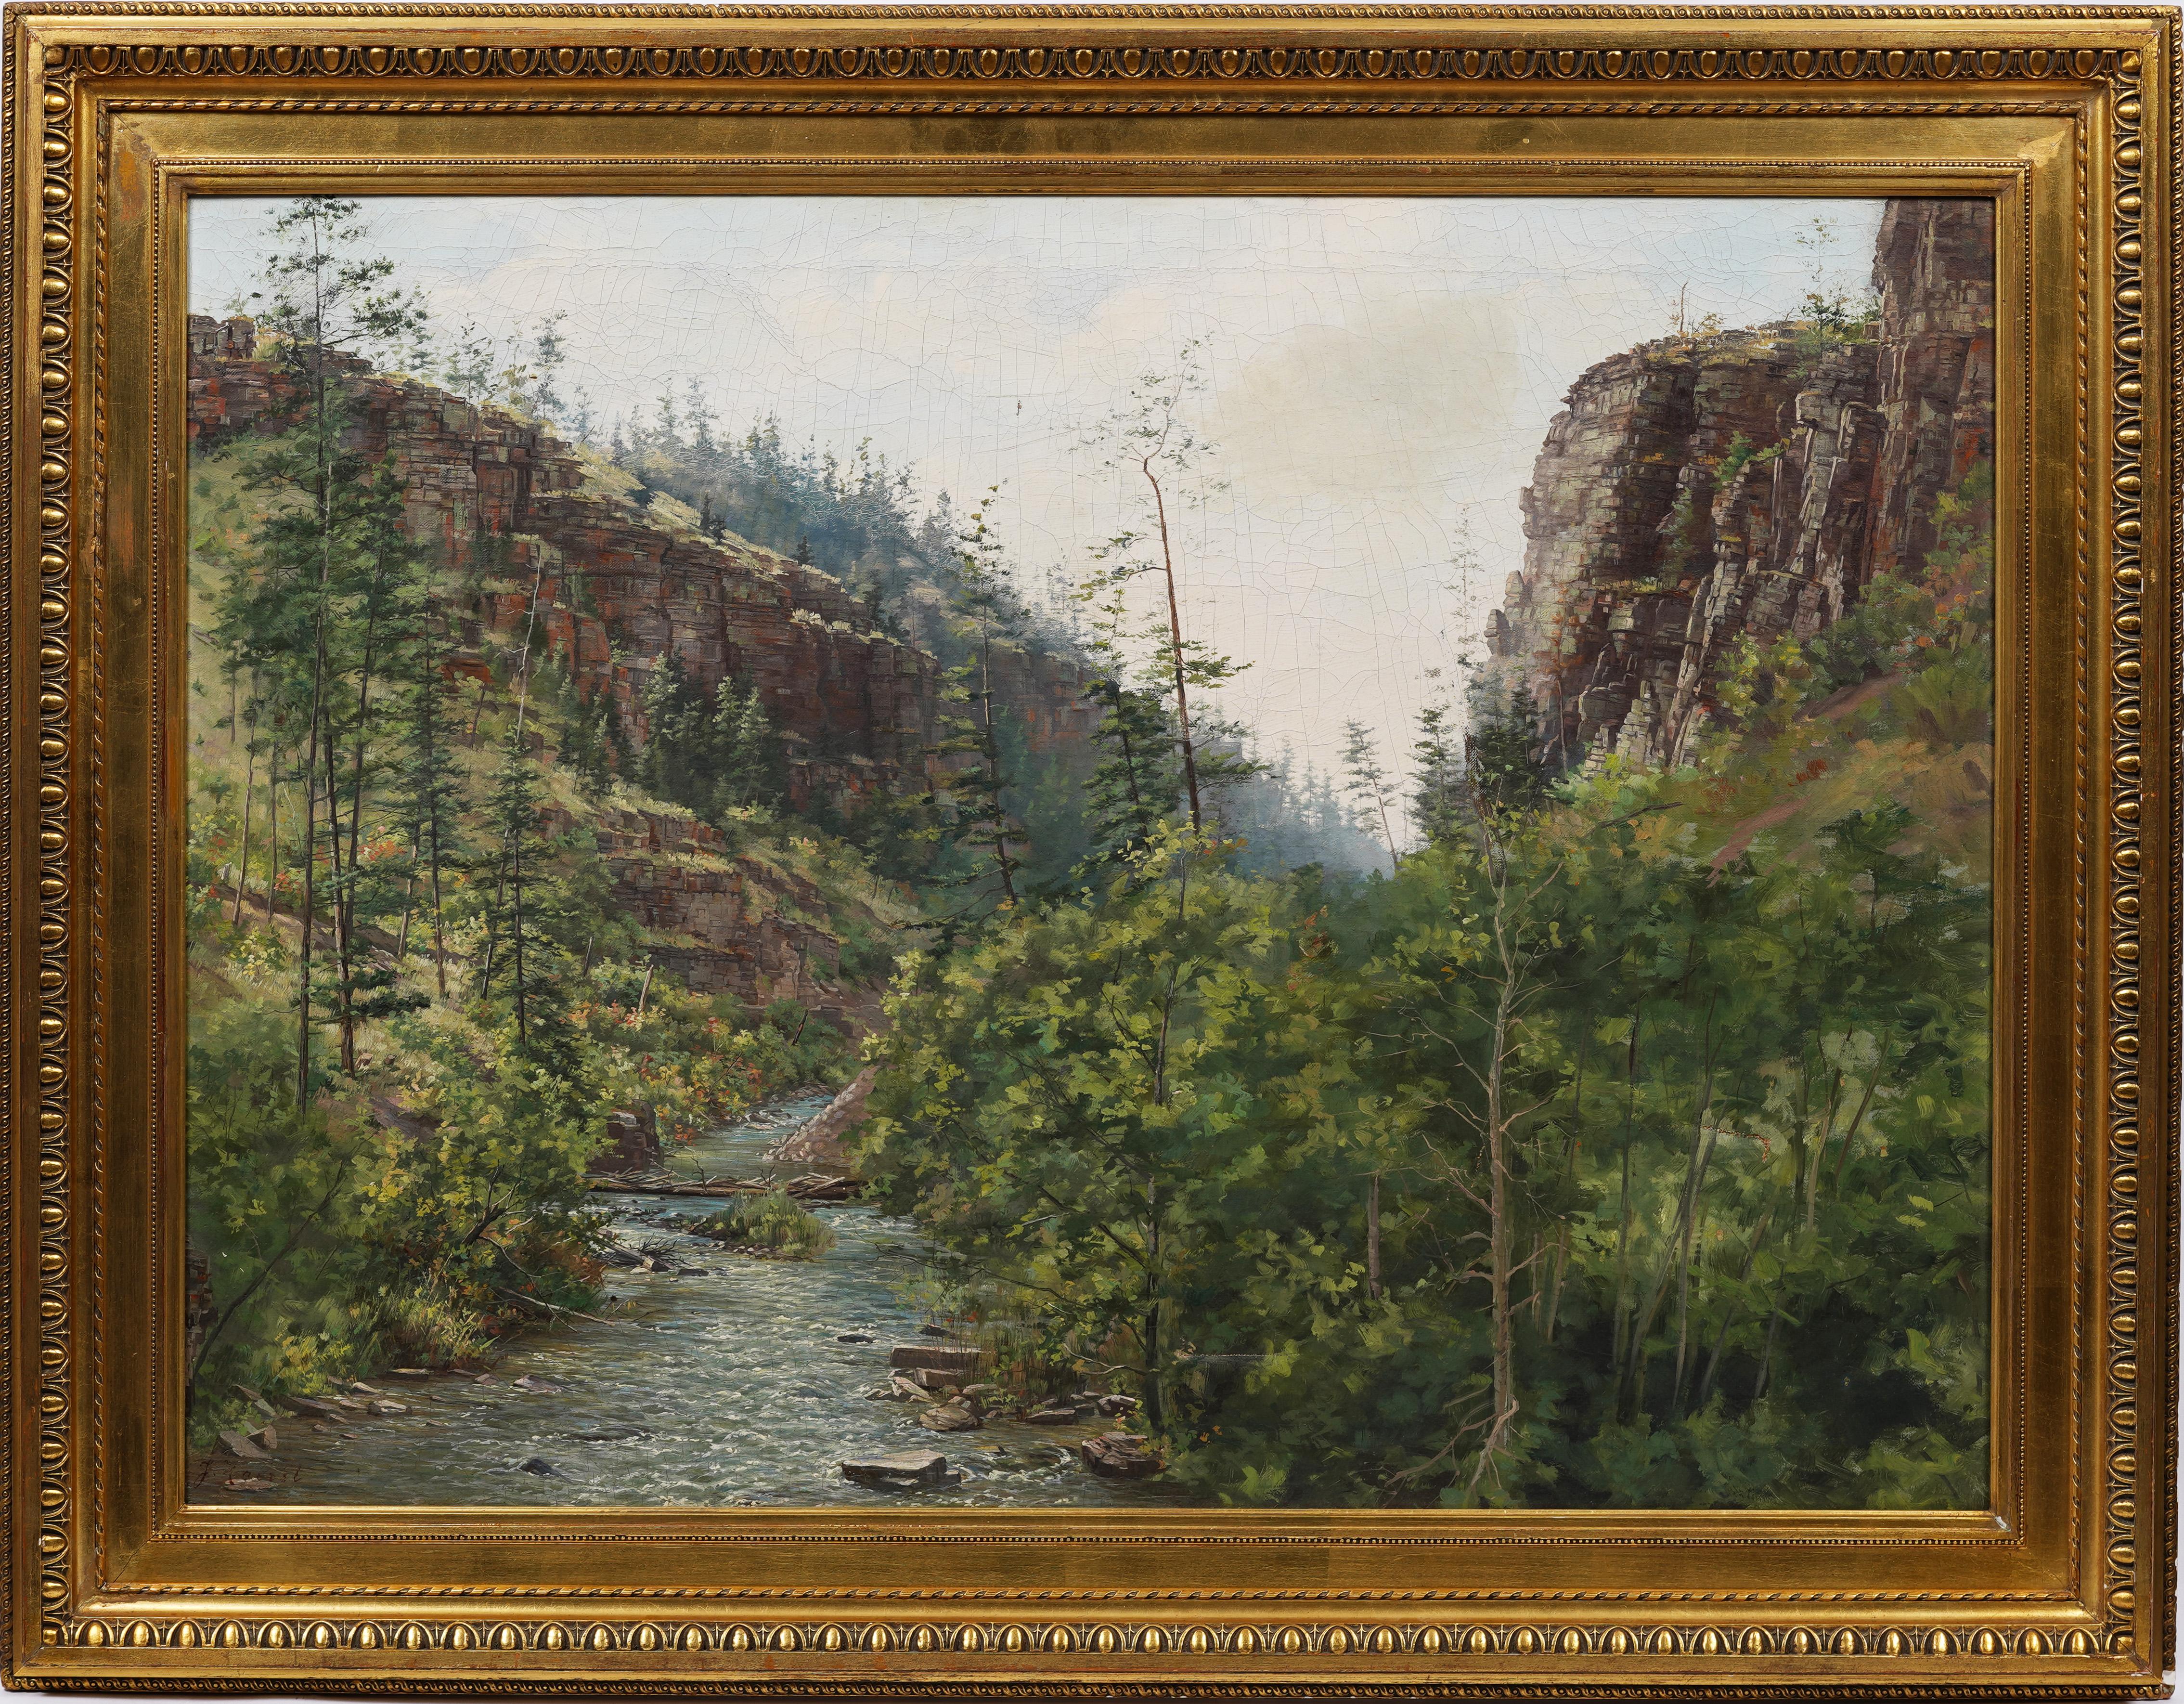 Unknown Landscape Painting - Large Antique American Impressionist River Valley Framed Landscape Oil Painting